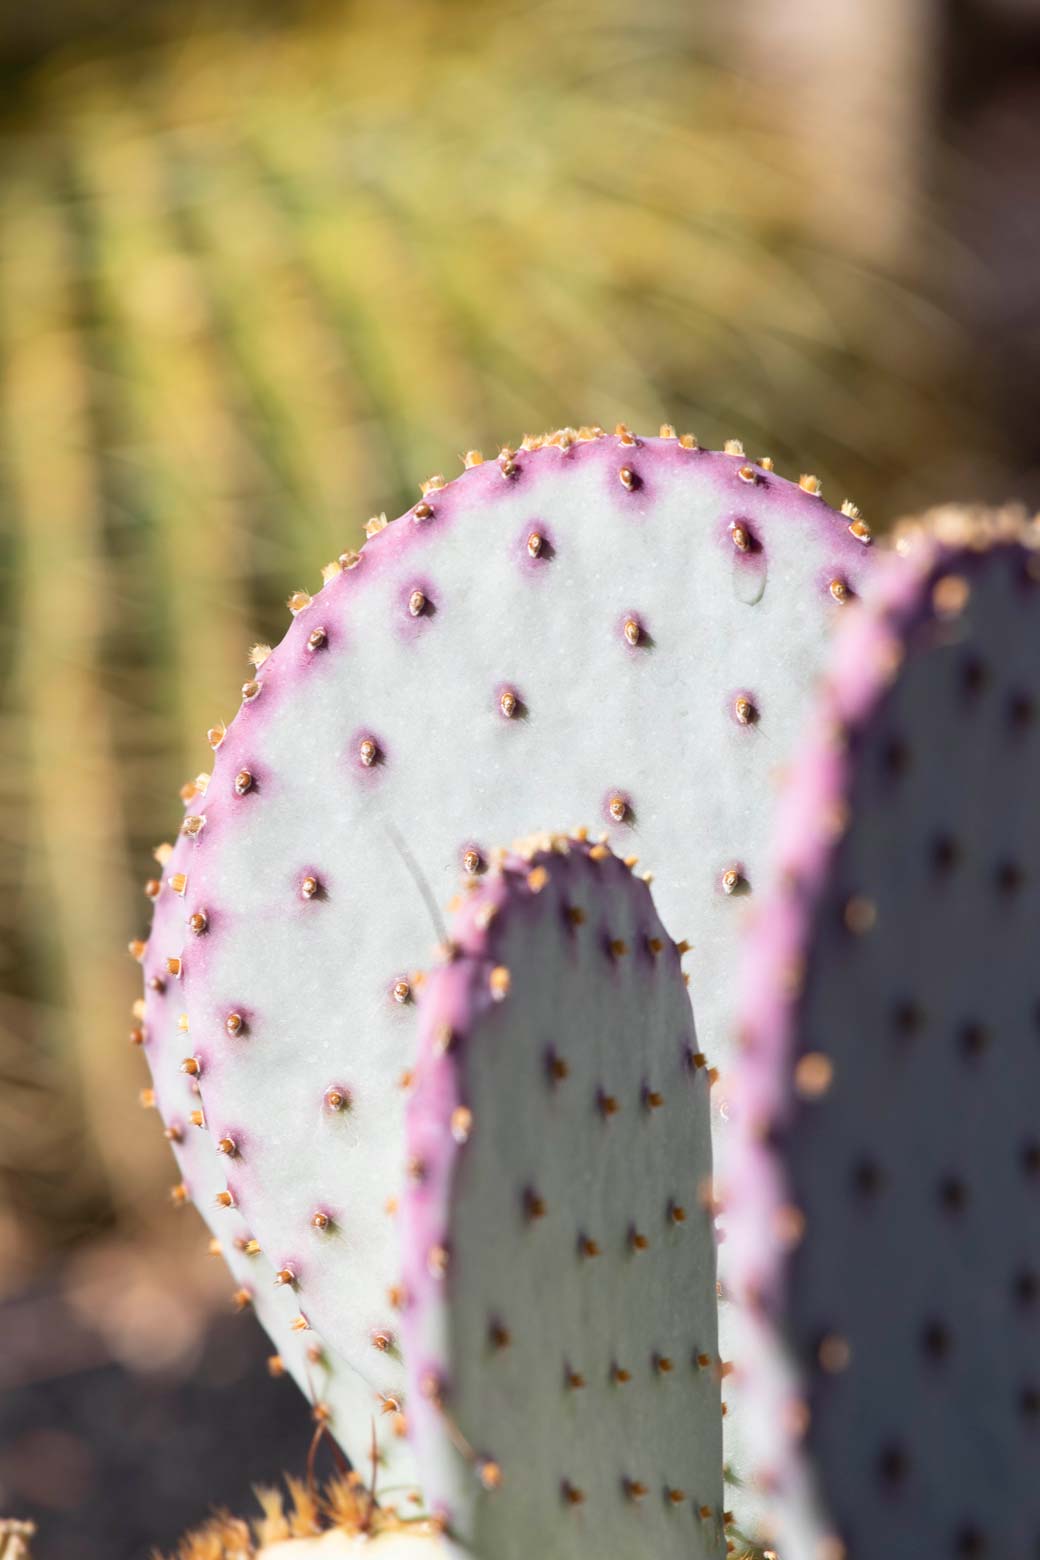 A close-up of the pads and spines of a Santa Rita cactus.